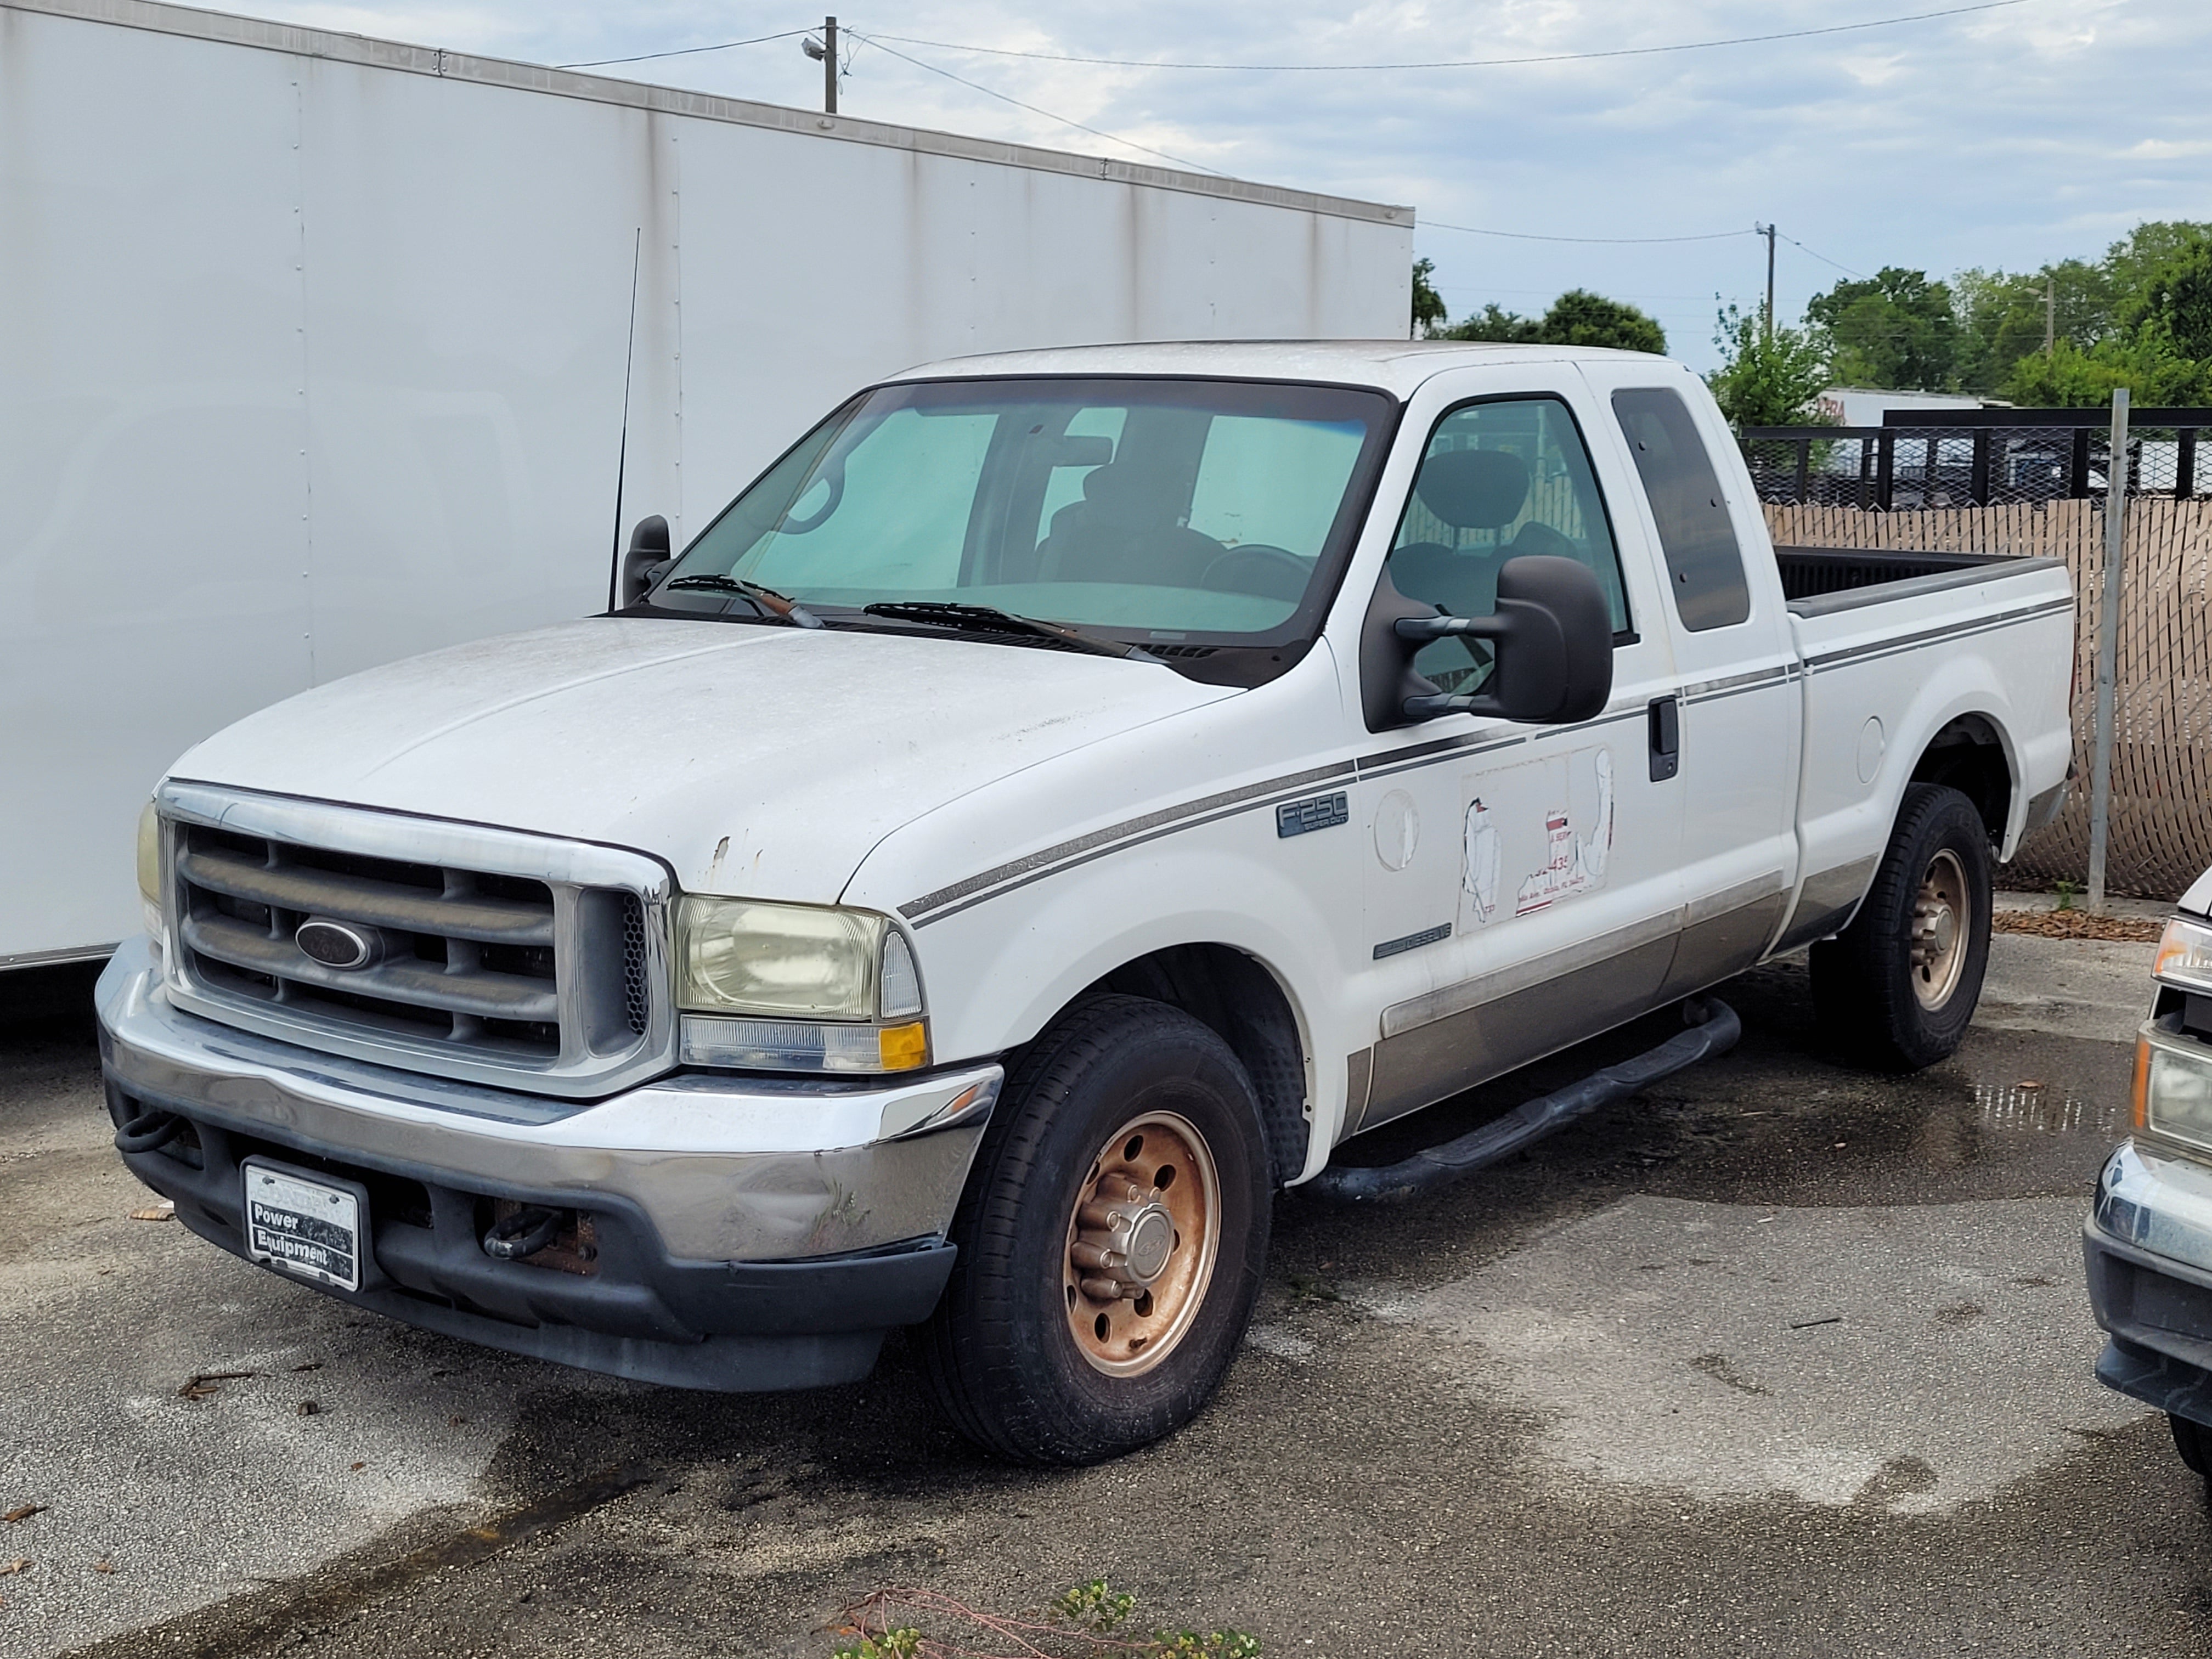 2002 Ford F250 Super Duty 2WD with 7.3 Turbo Diesel (Used)